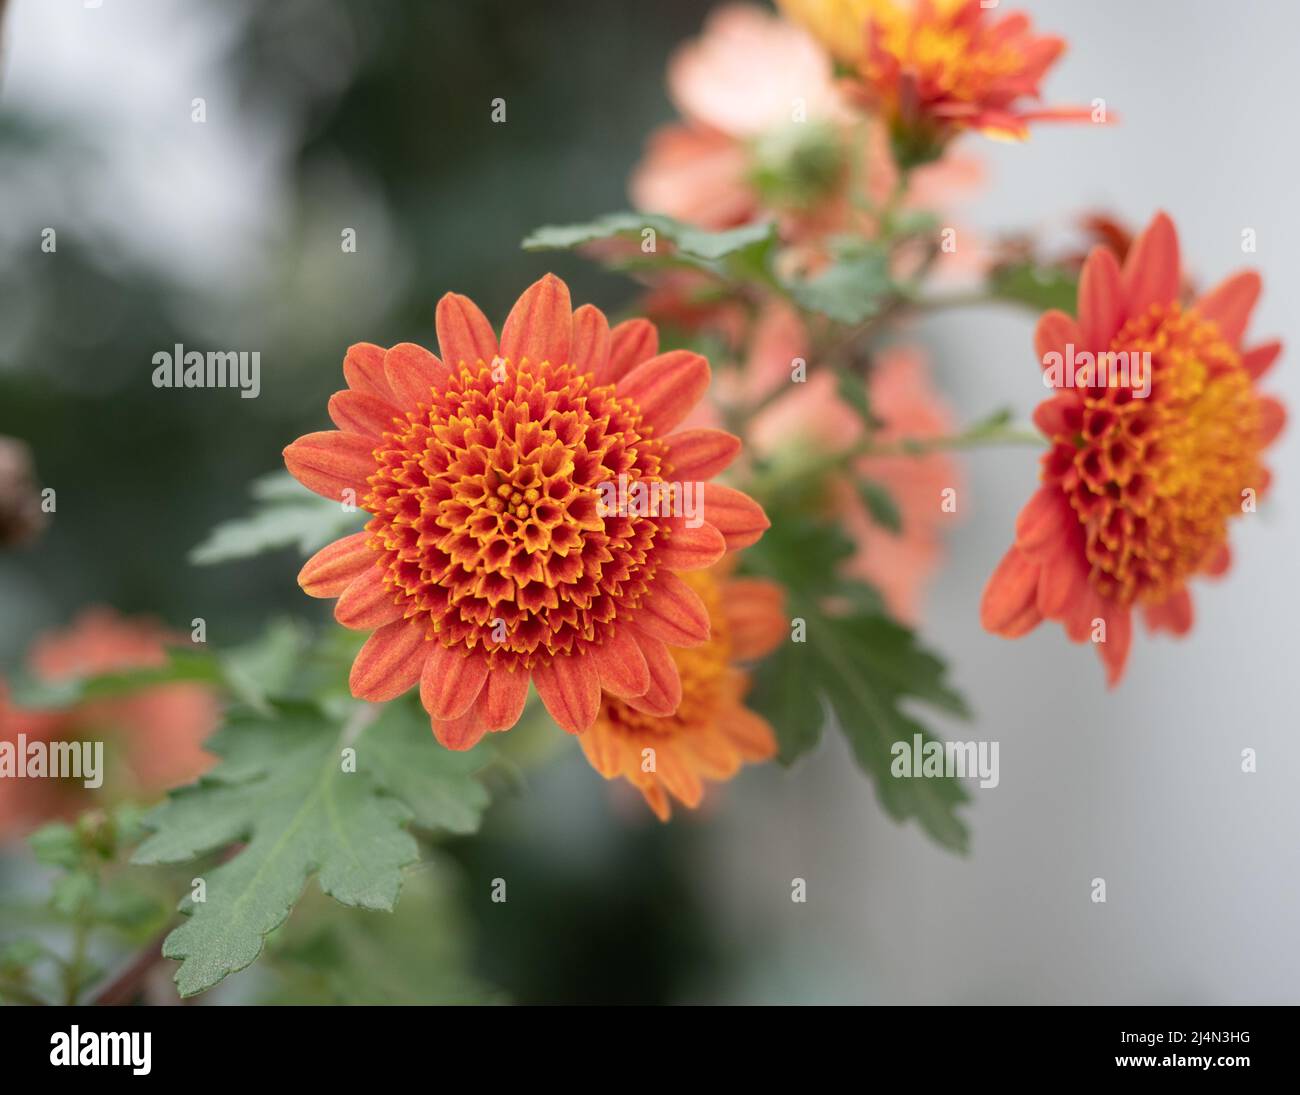 Coral-colored chyrsanthemum flowers with short ray flower petals and anemone-like disc flower. Stock Photo